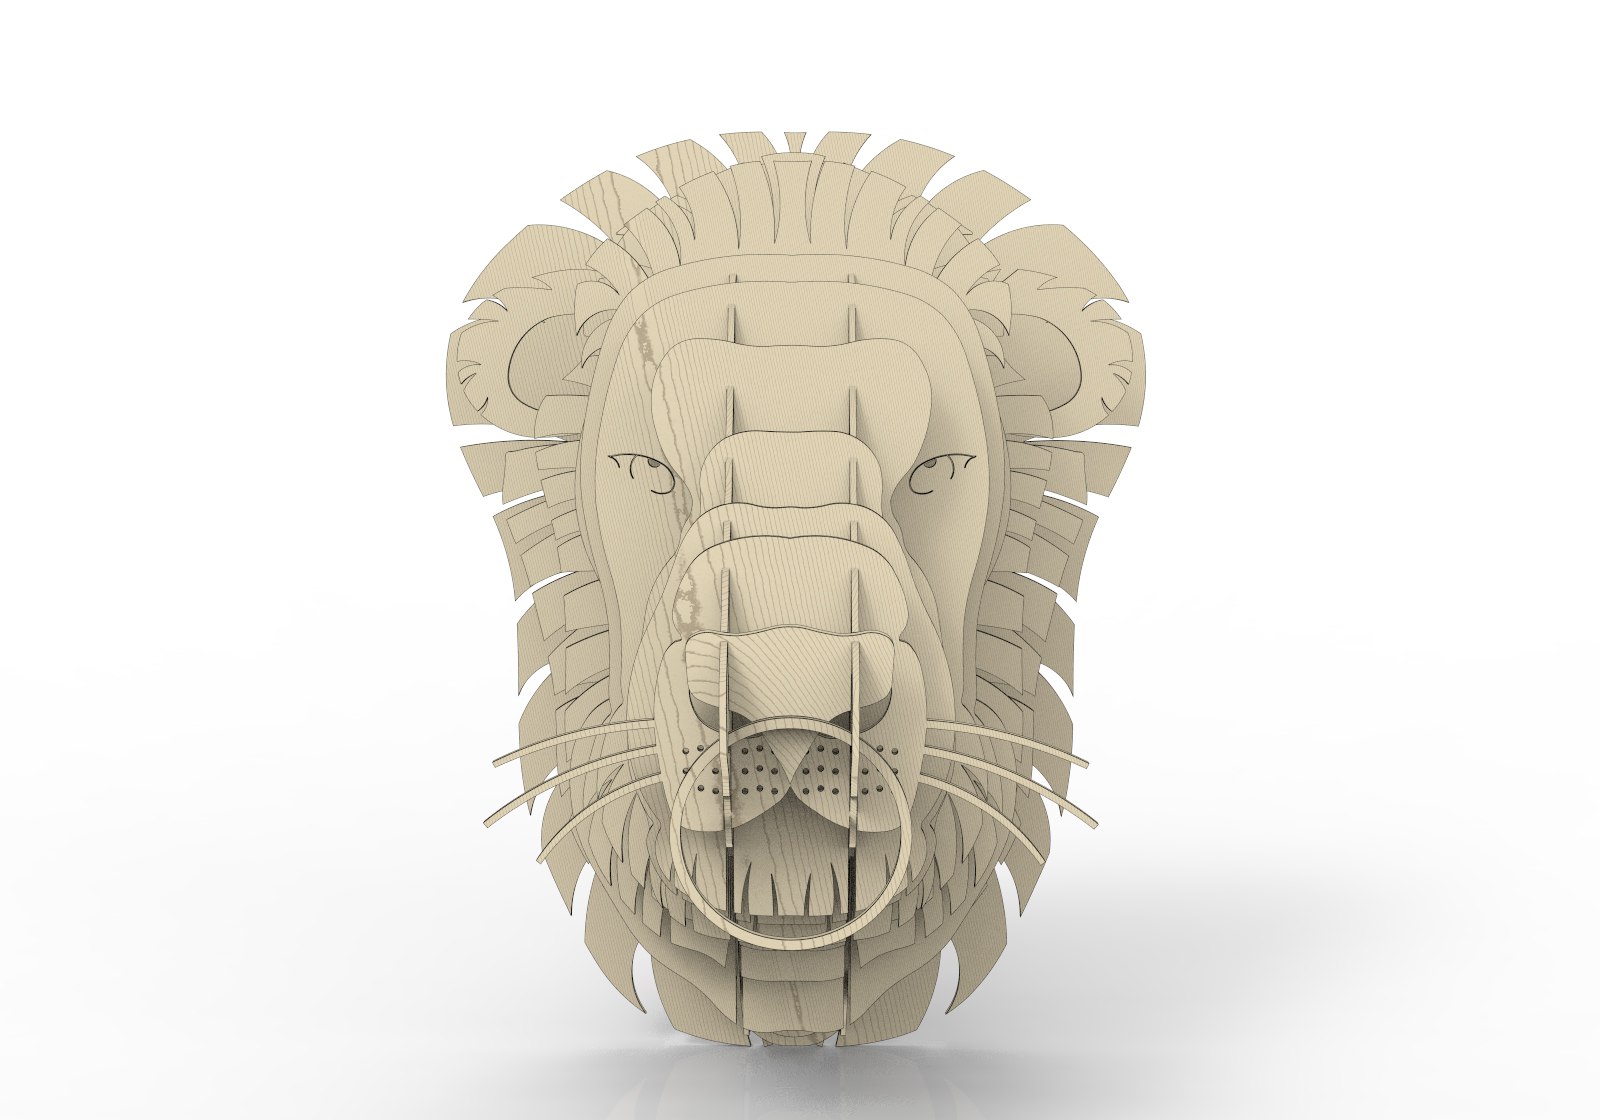 Lion Head 3d Layered Svg Digital File Lion Head 3d For Cutting Plywood Dxf File For Paper Cutting Lion Head 3d Png Dxf Craft Supplies Tools Tools Keyforrest Lt